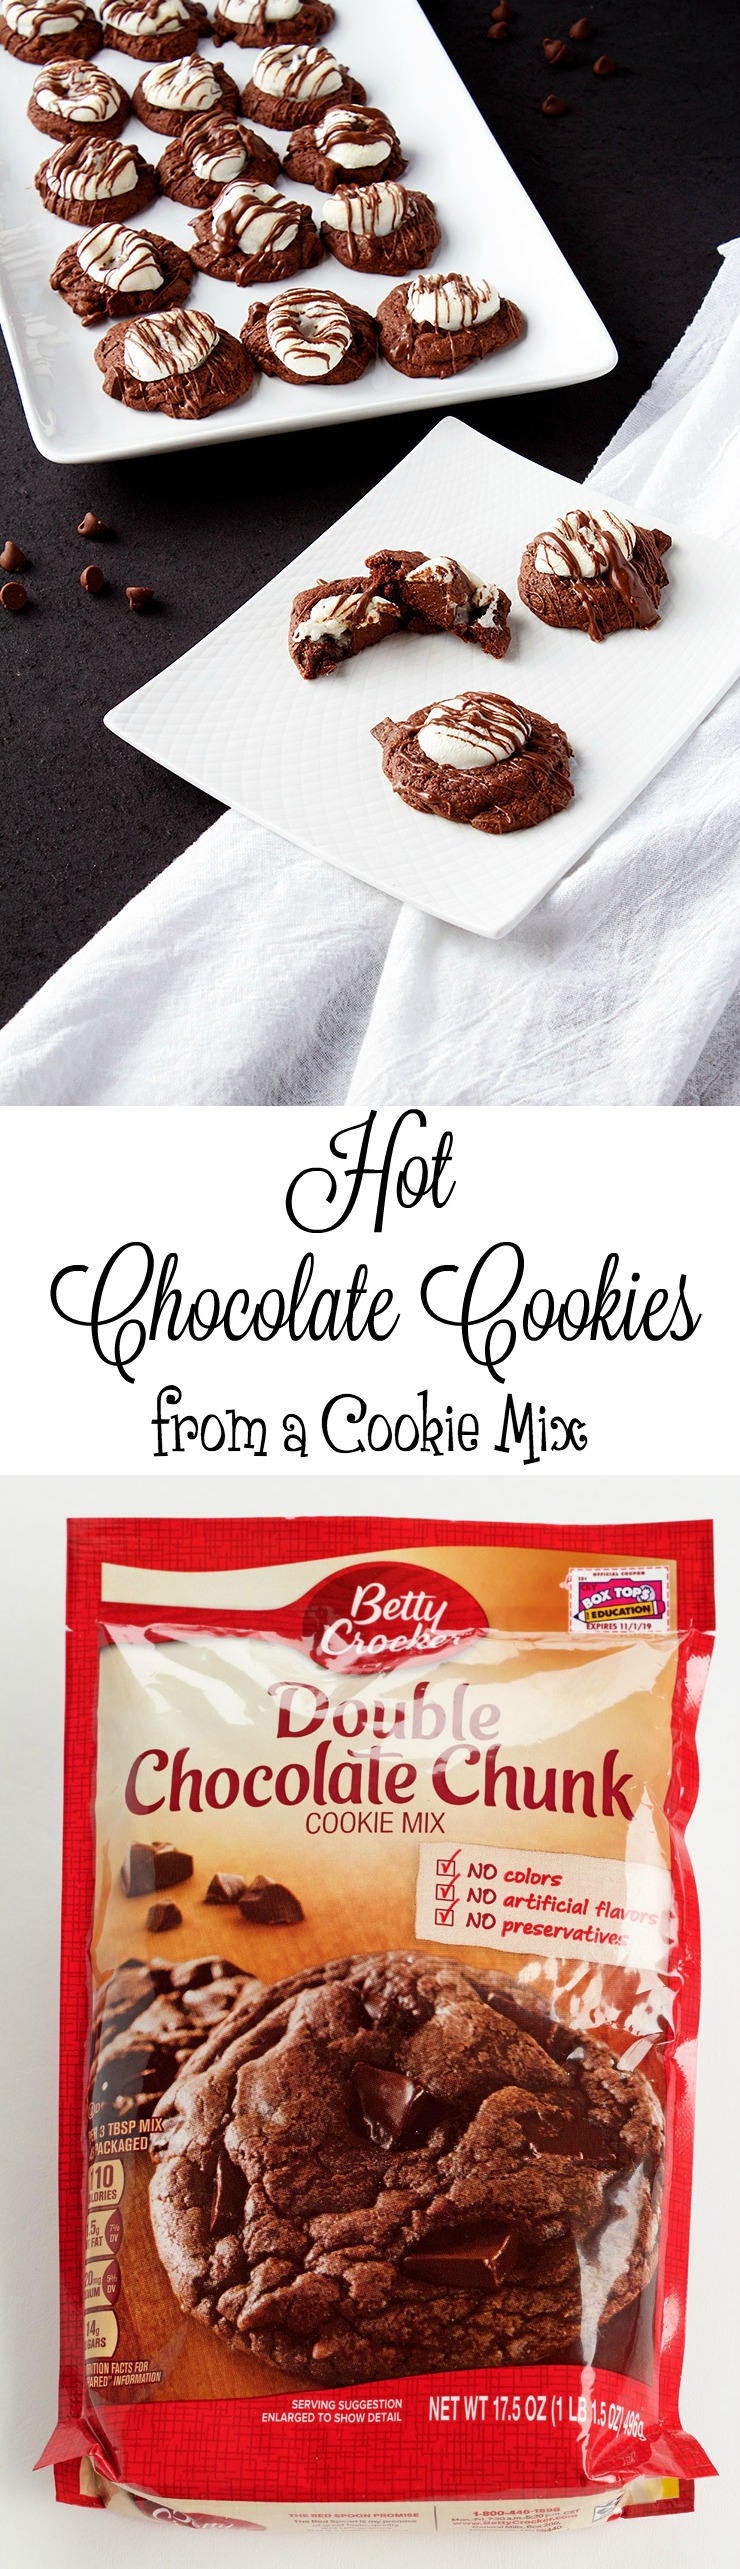 Hot Chocolate Cookies from a Simple Cookie Mix | The Bearfoot Baker